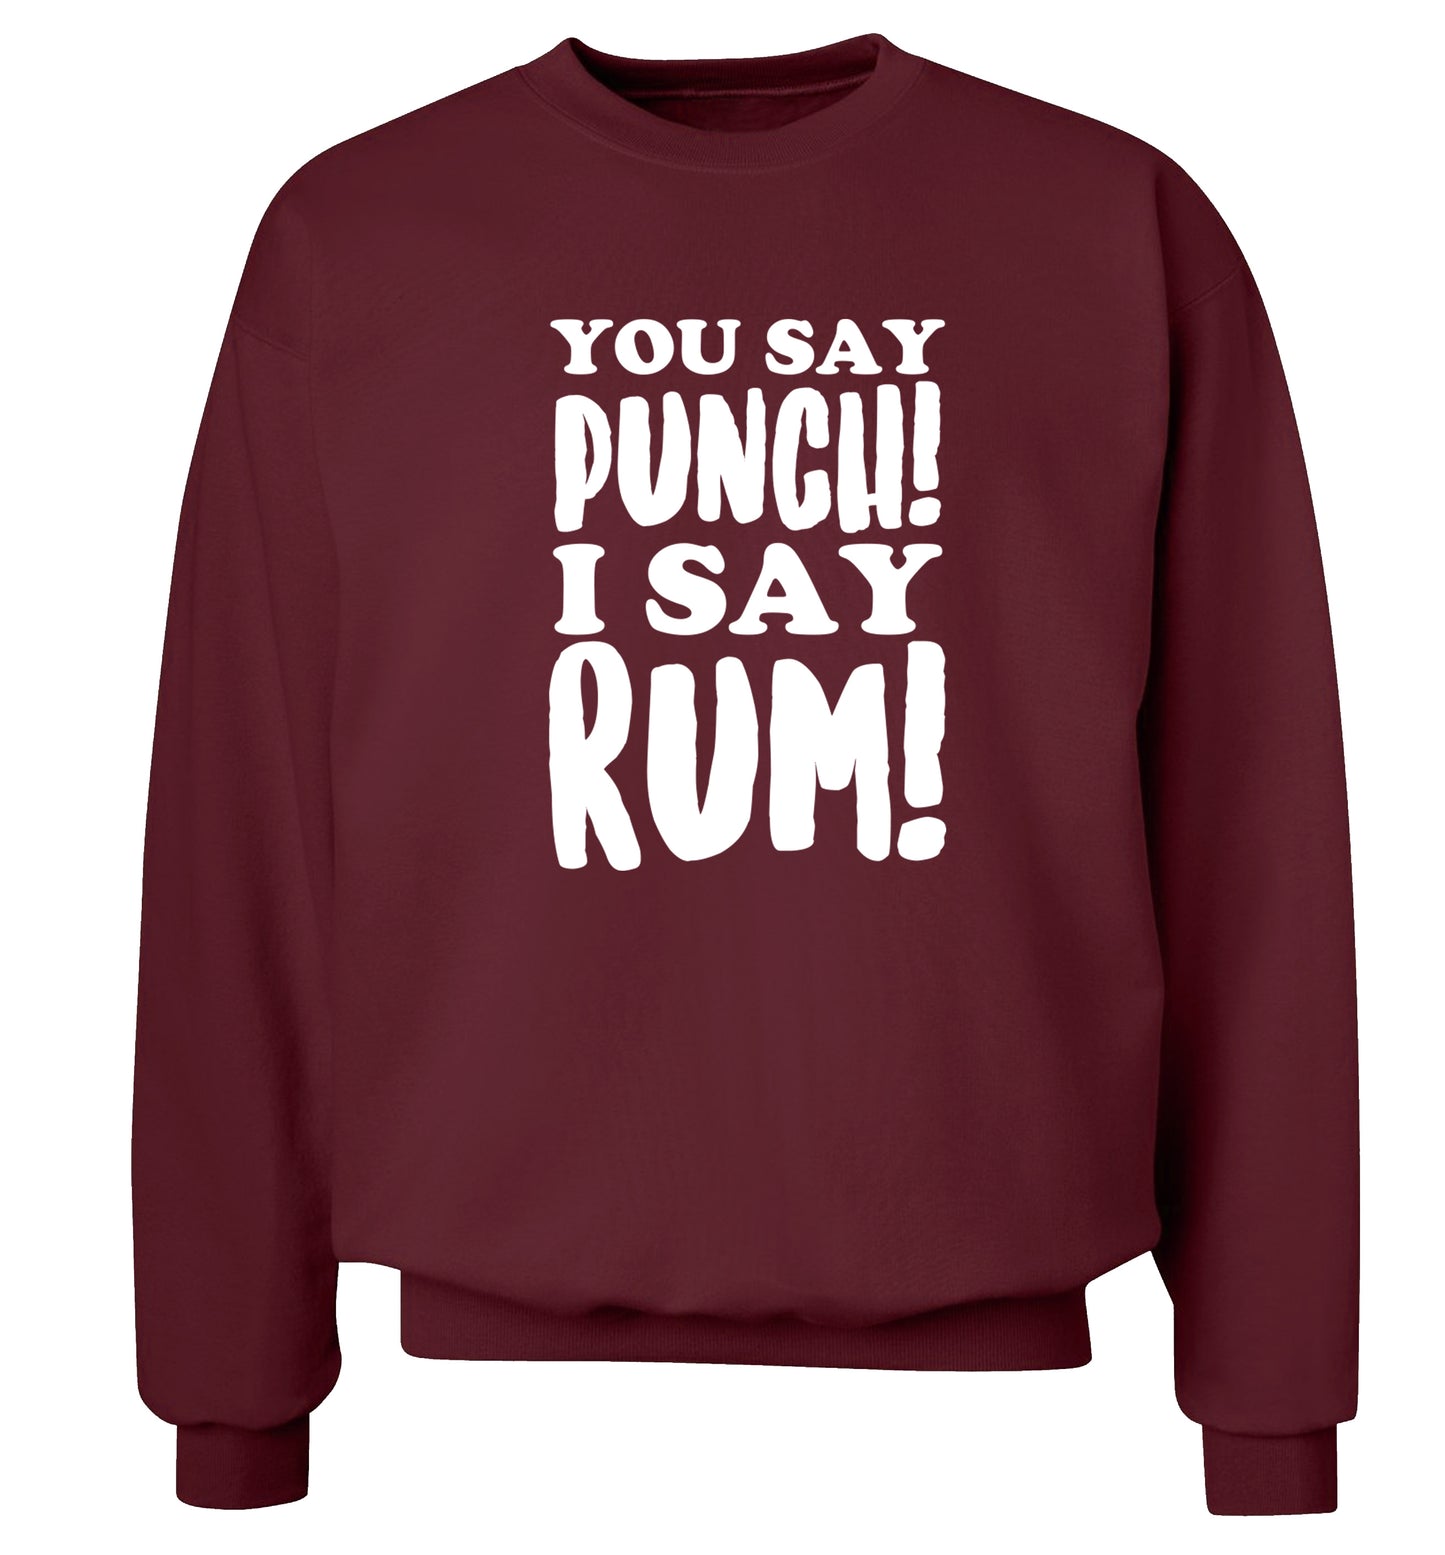 You say punch I say rum! Adult's unisex maroon Sweater 2XL